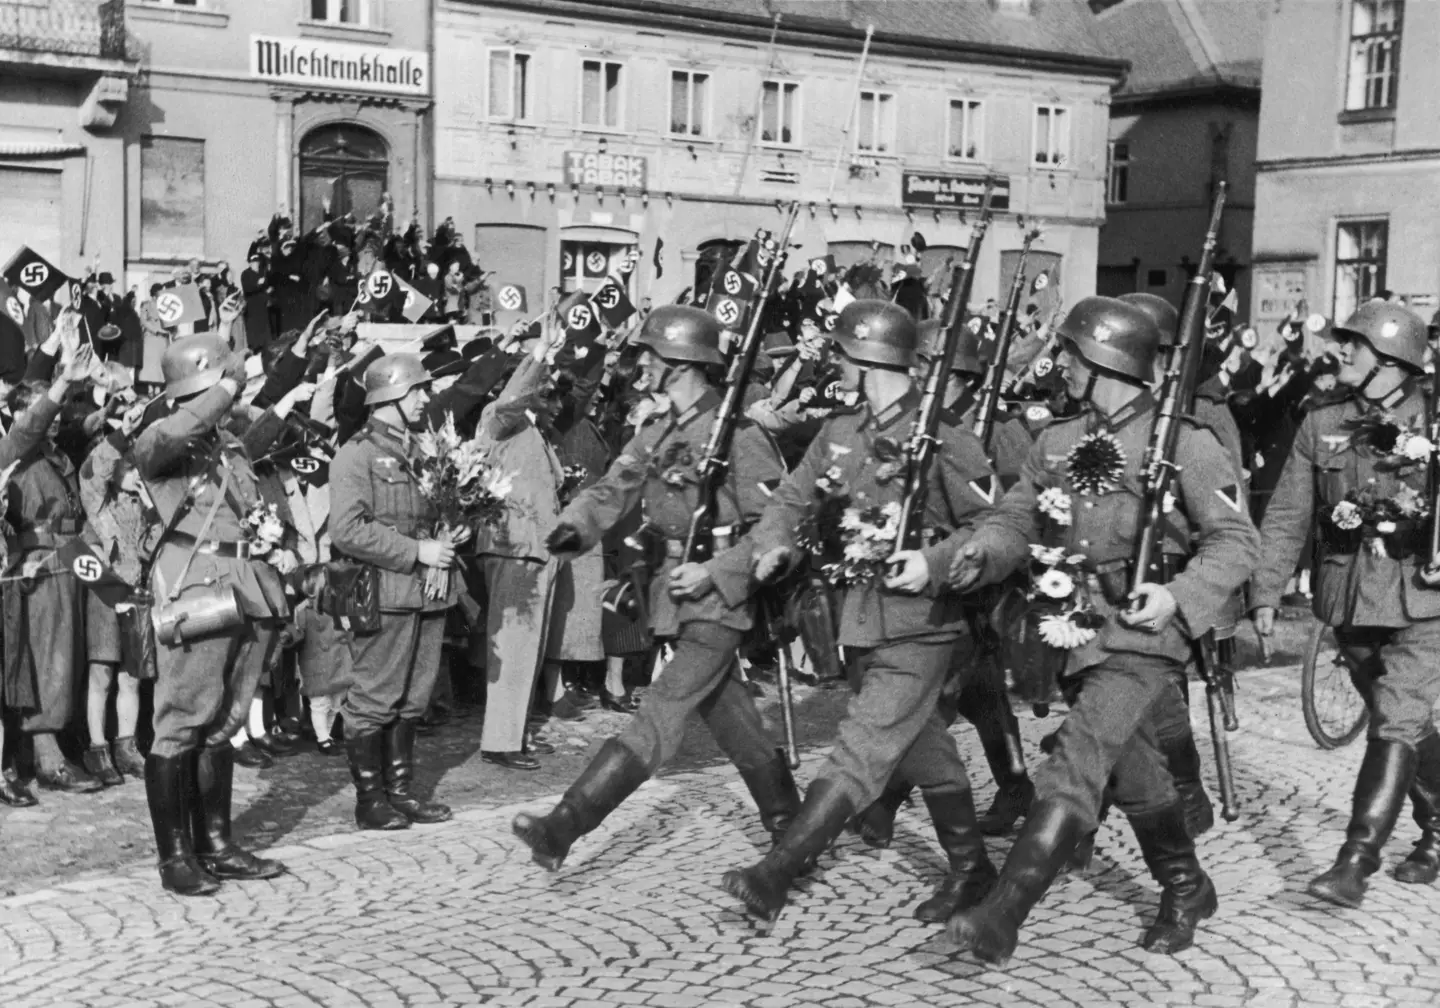 Nazi Germany soliders in 1938. (FPG/Hulton Archive/Getty Images)